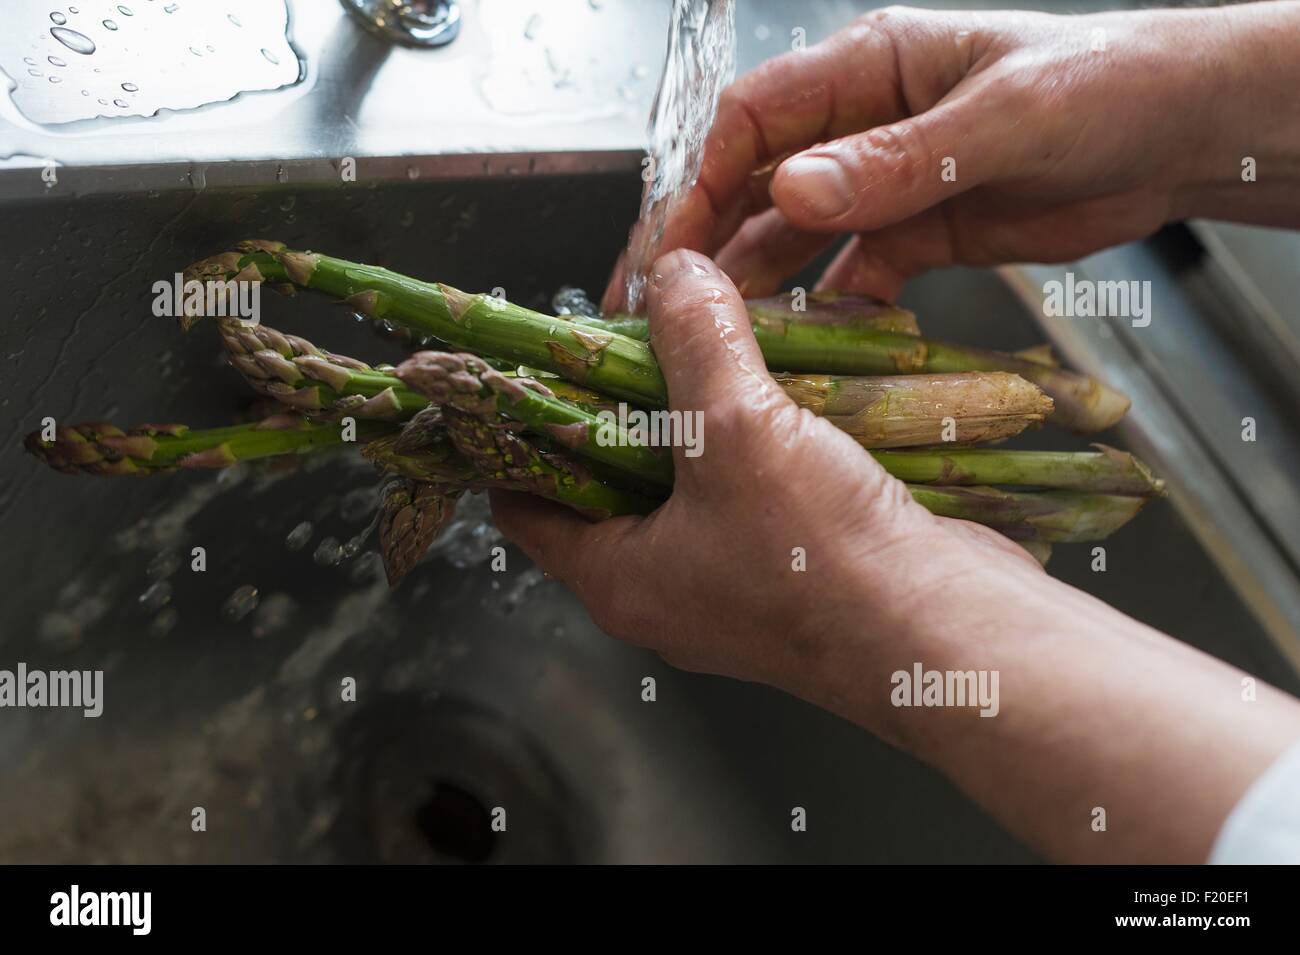 Washing asparagus, focus on hands Stock Photo